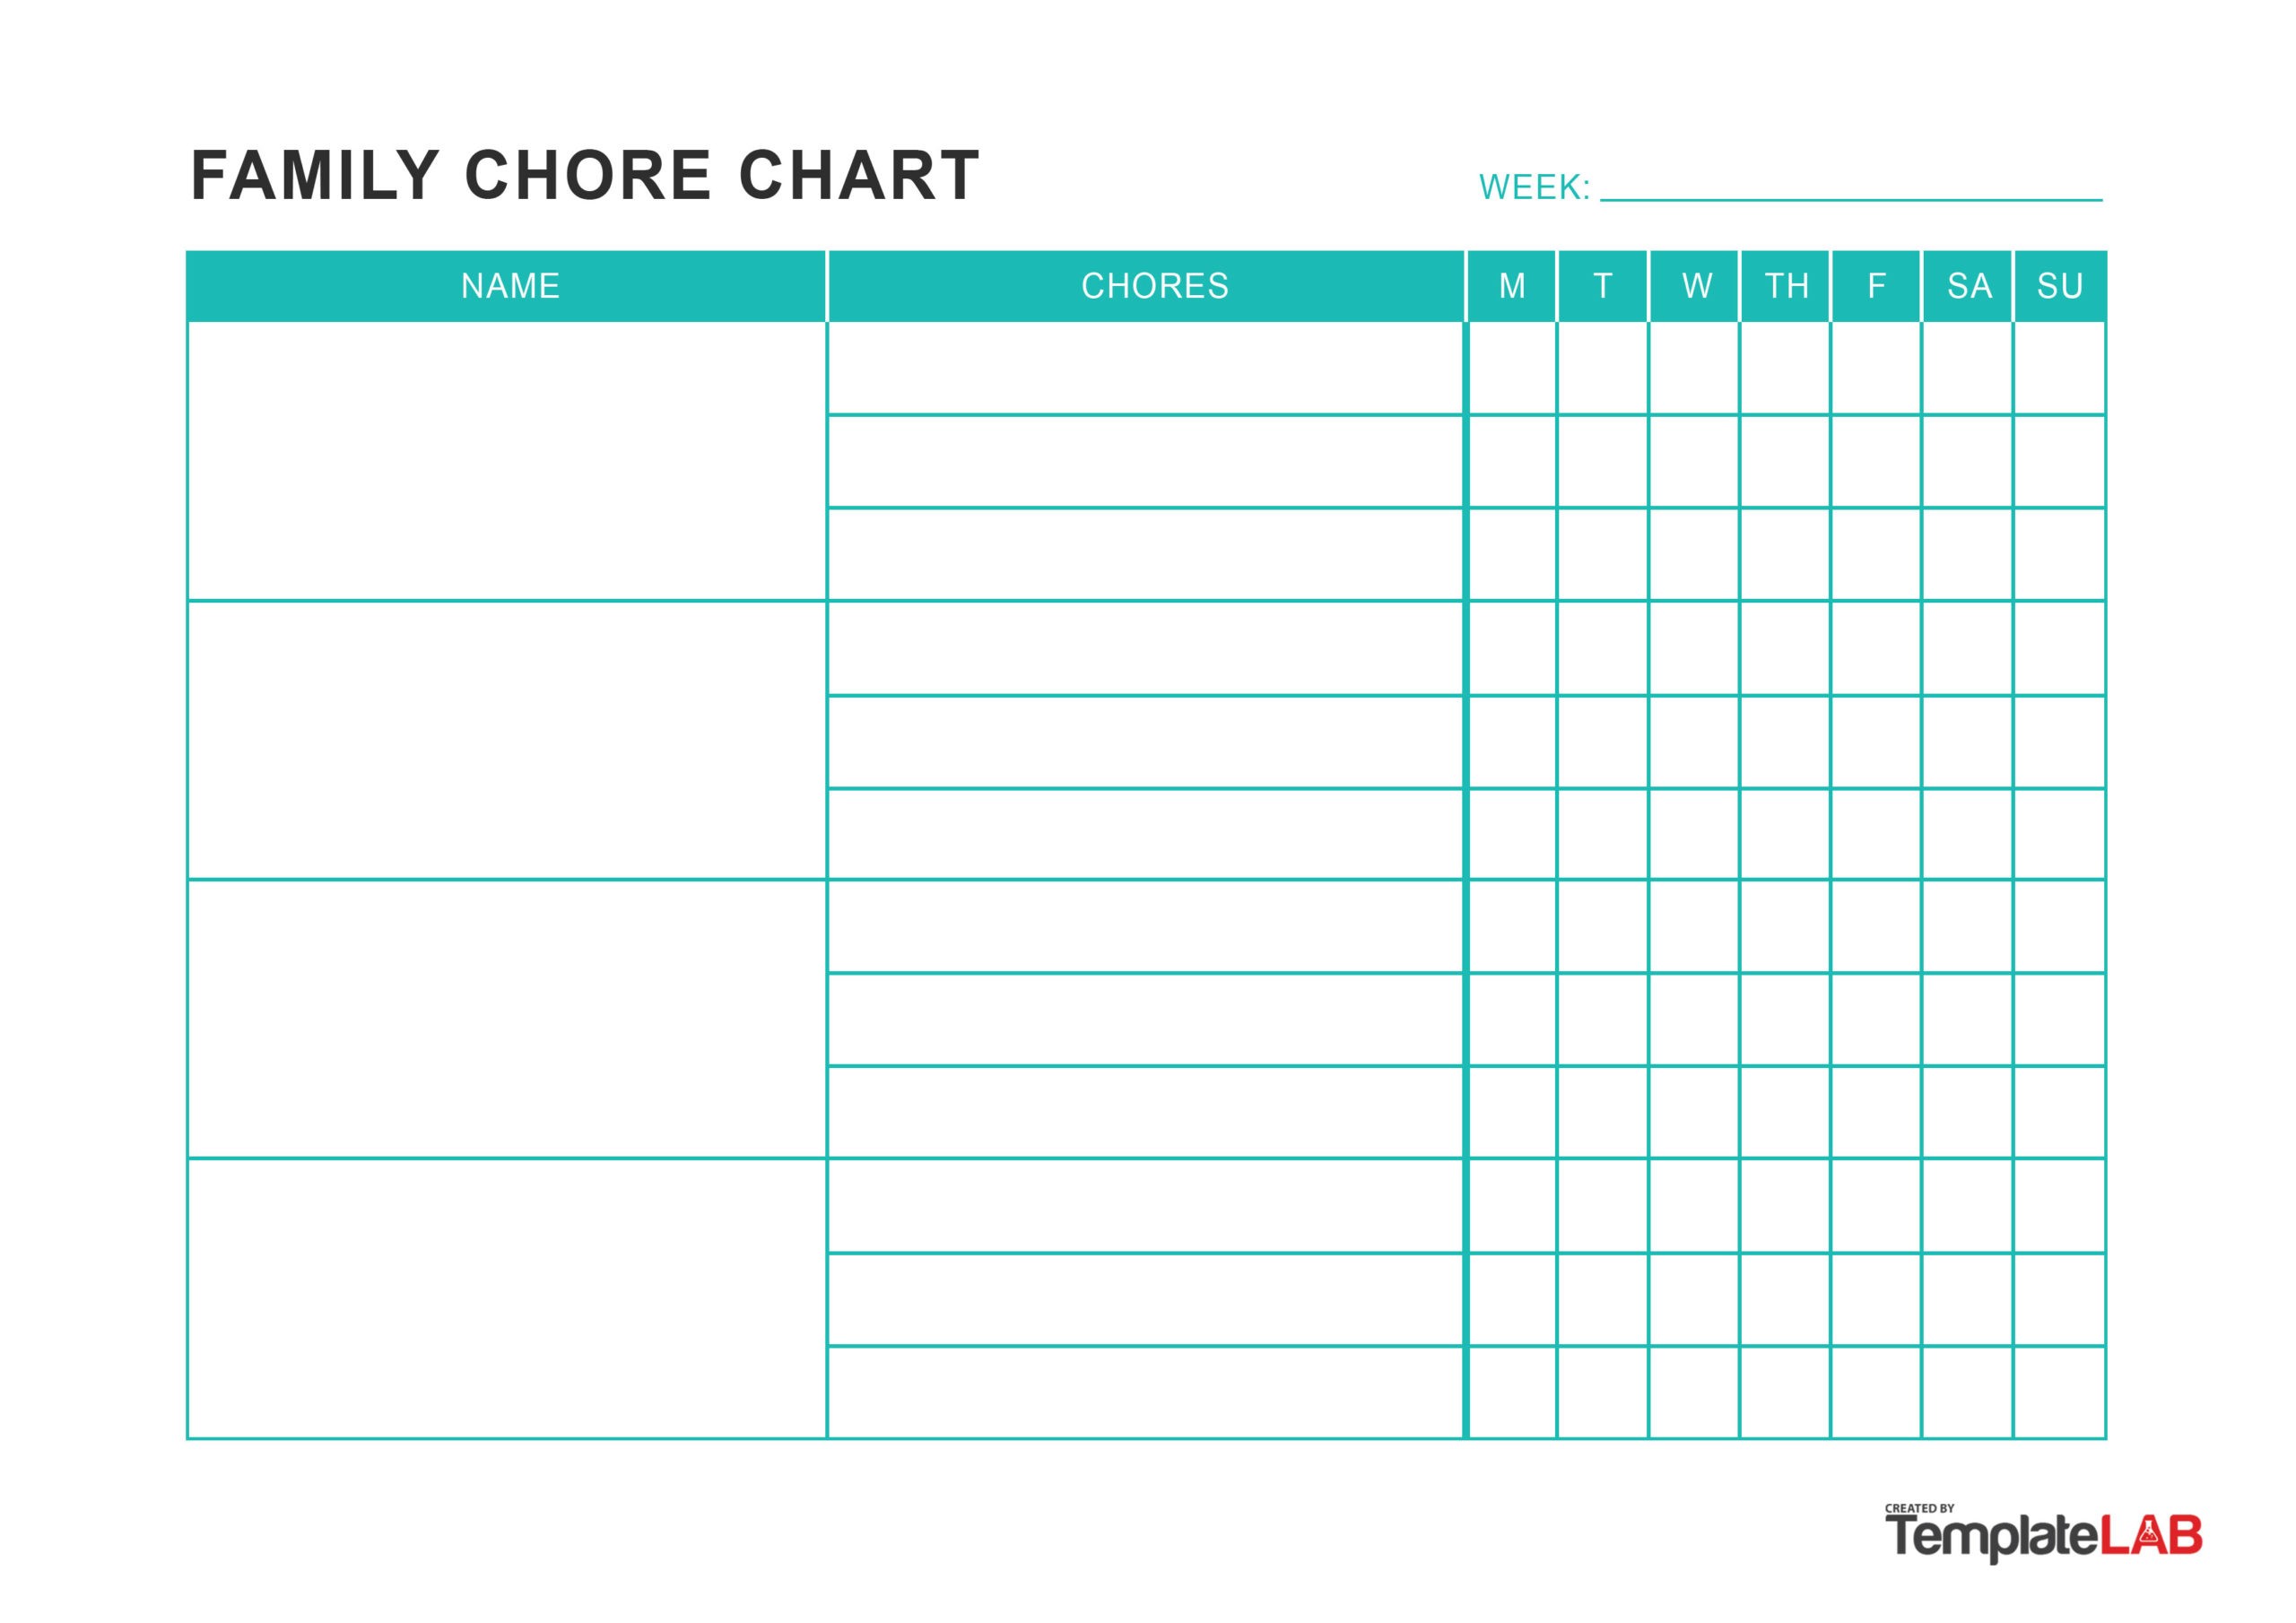 Free Family Chore Chart Template FREE PRINTABLE TEMPLATES